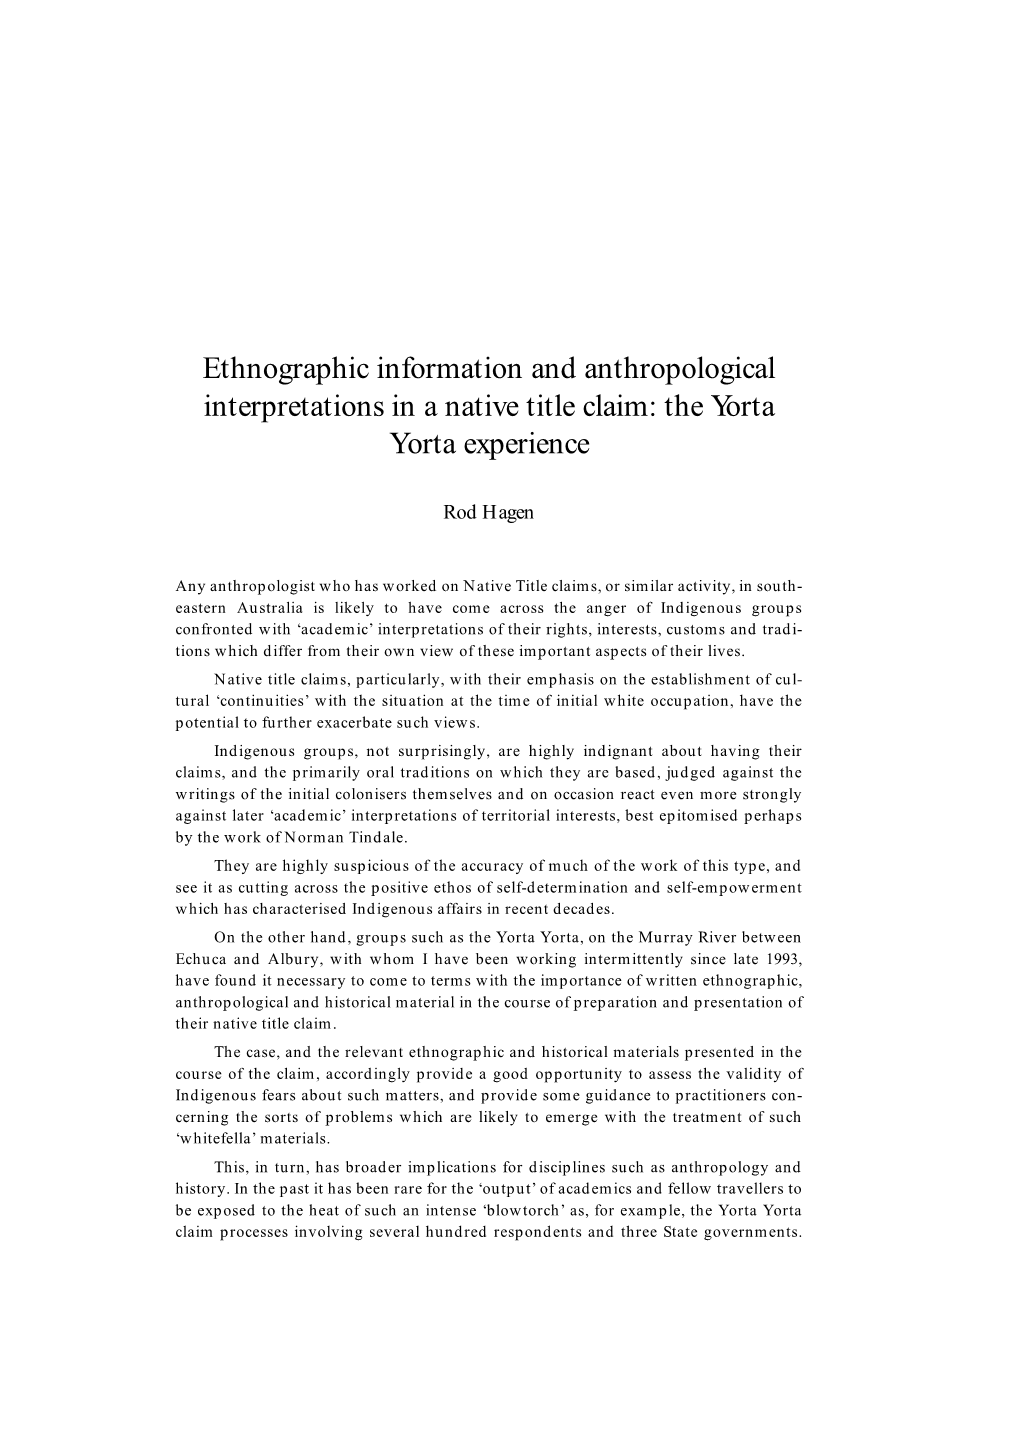 Ethnographic Information and Anthropological Interpretations in a Native Title Claim: the Yorta Yorta Experience